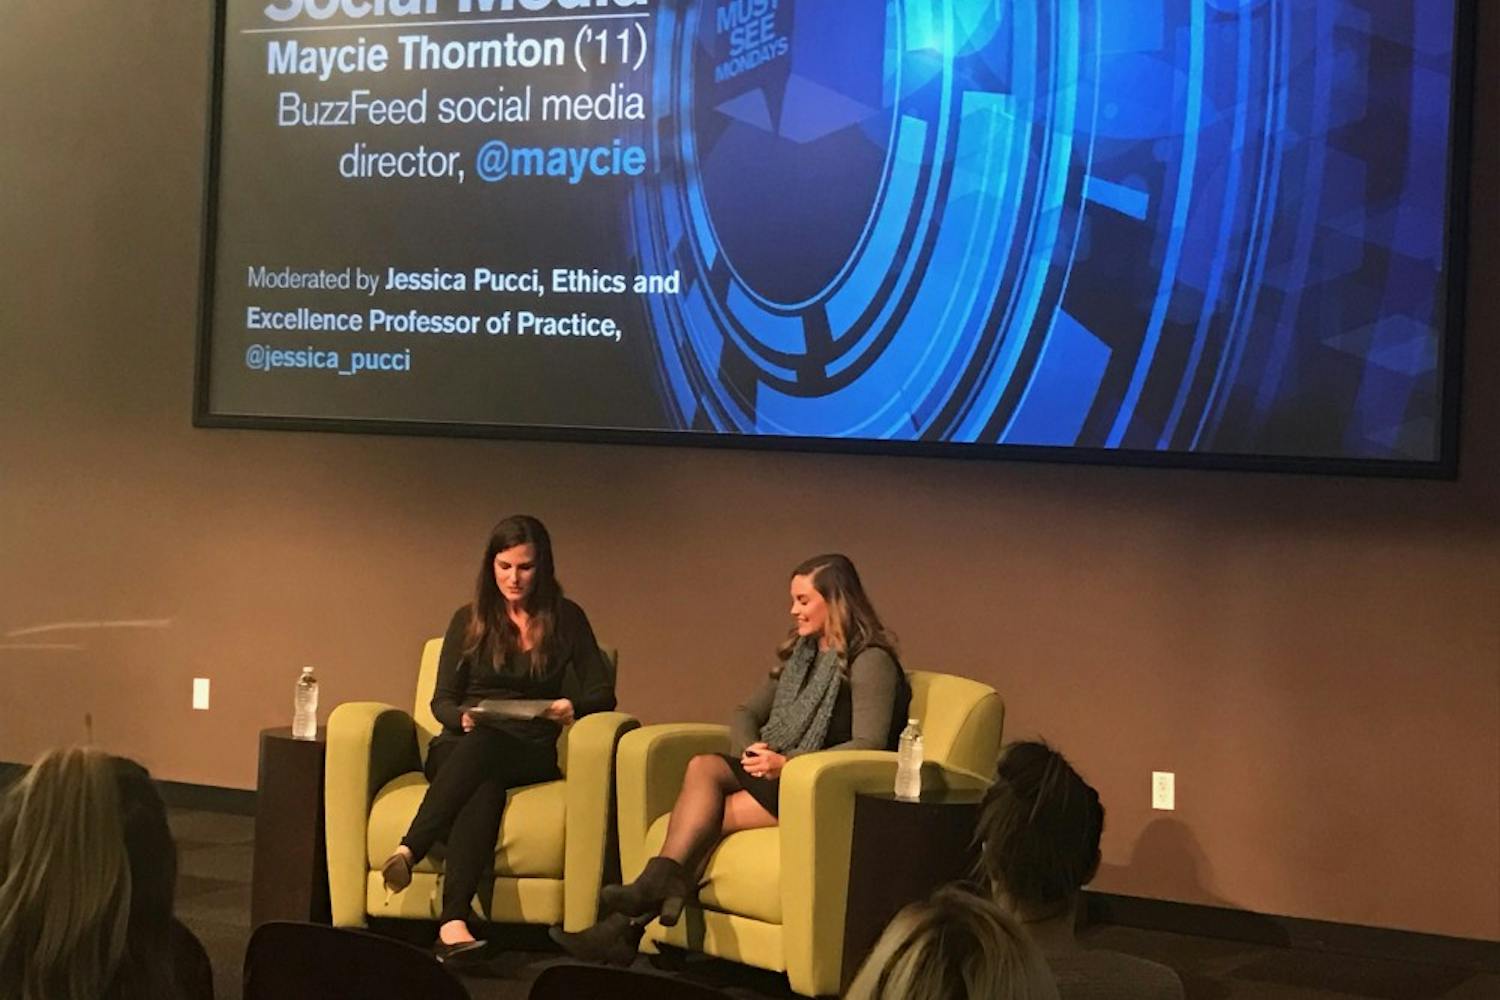 Jessica Pucci asks Maycie Thornton questions about working in the social media and news world at a Must See Mondays event at the ASU downtown campus on Feb. 20, 2017.